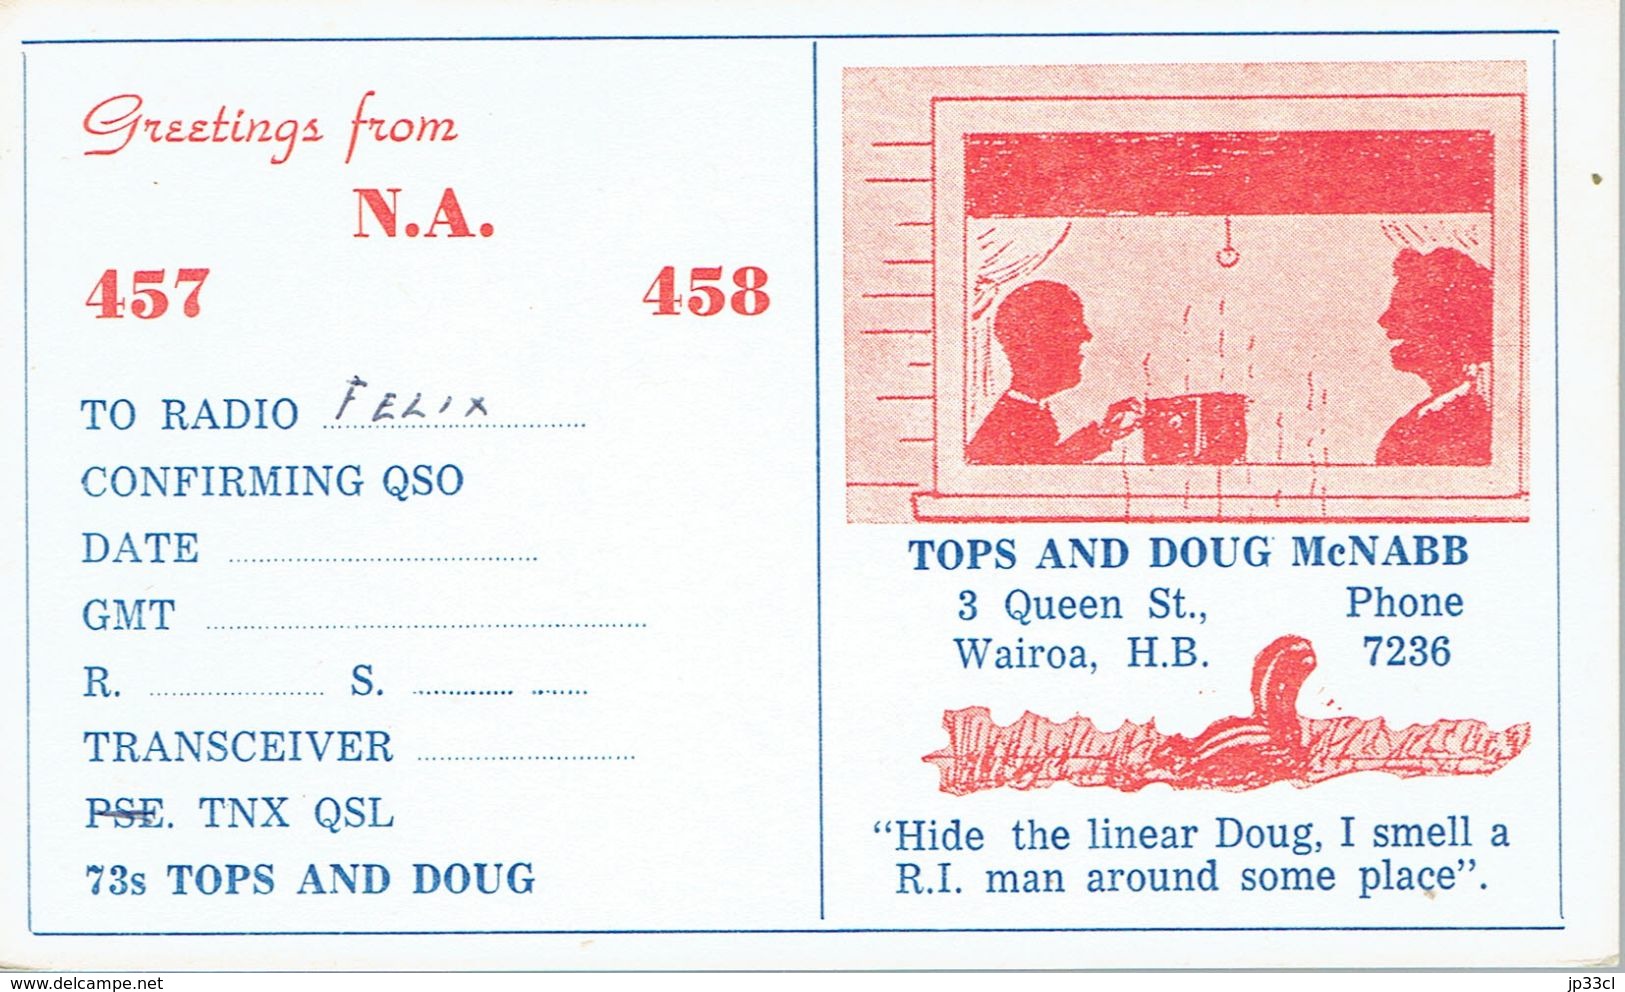 Old QSL From Tops And Doug McNabb, Queen St., Wairoa, H.B., New Zealand - CB